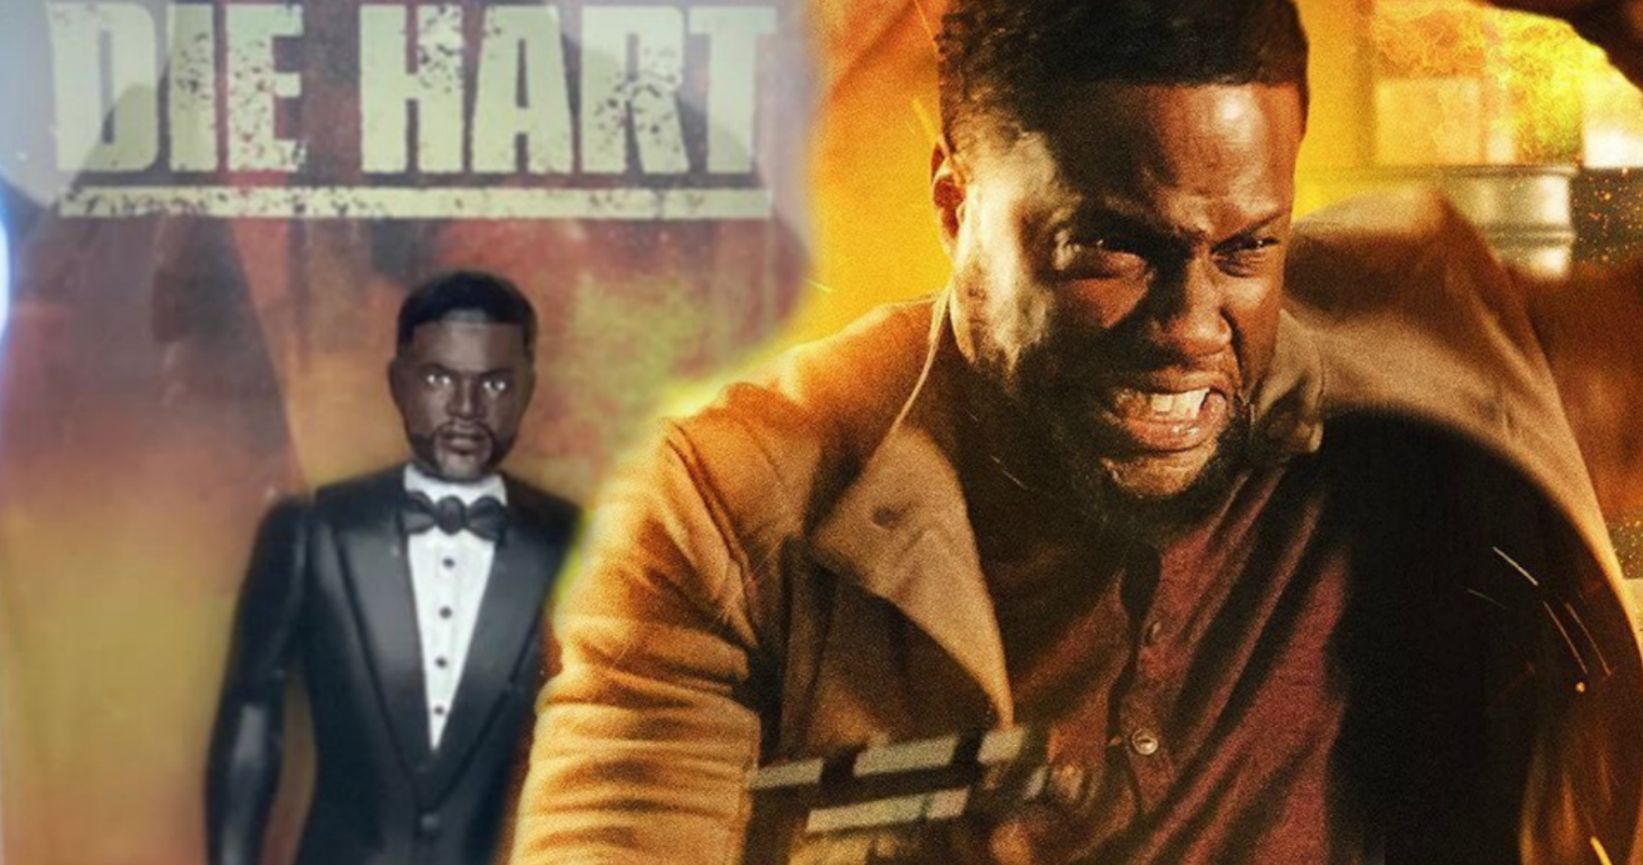 Kevin Hart Gets Roasted After Showing Off His Die Hart Action Figure